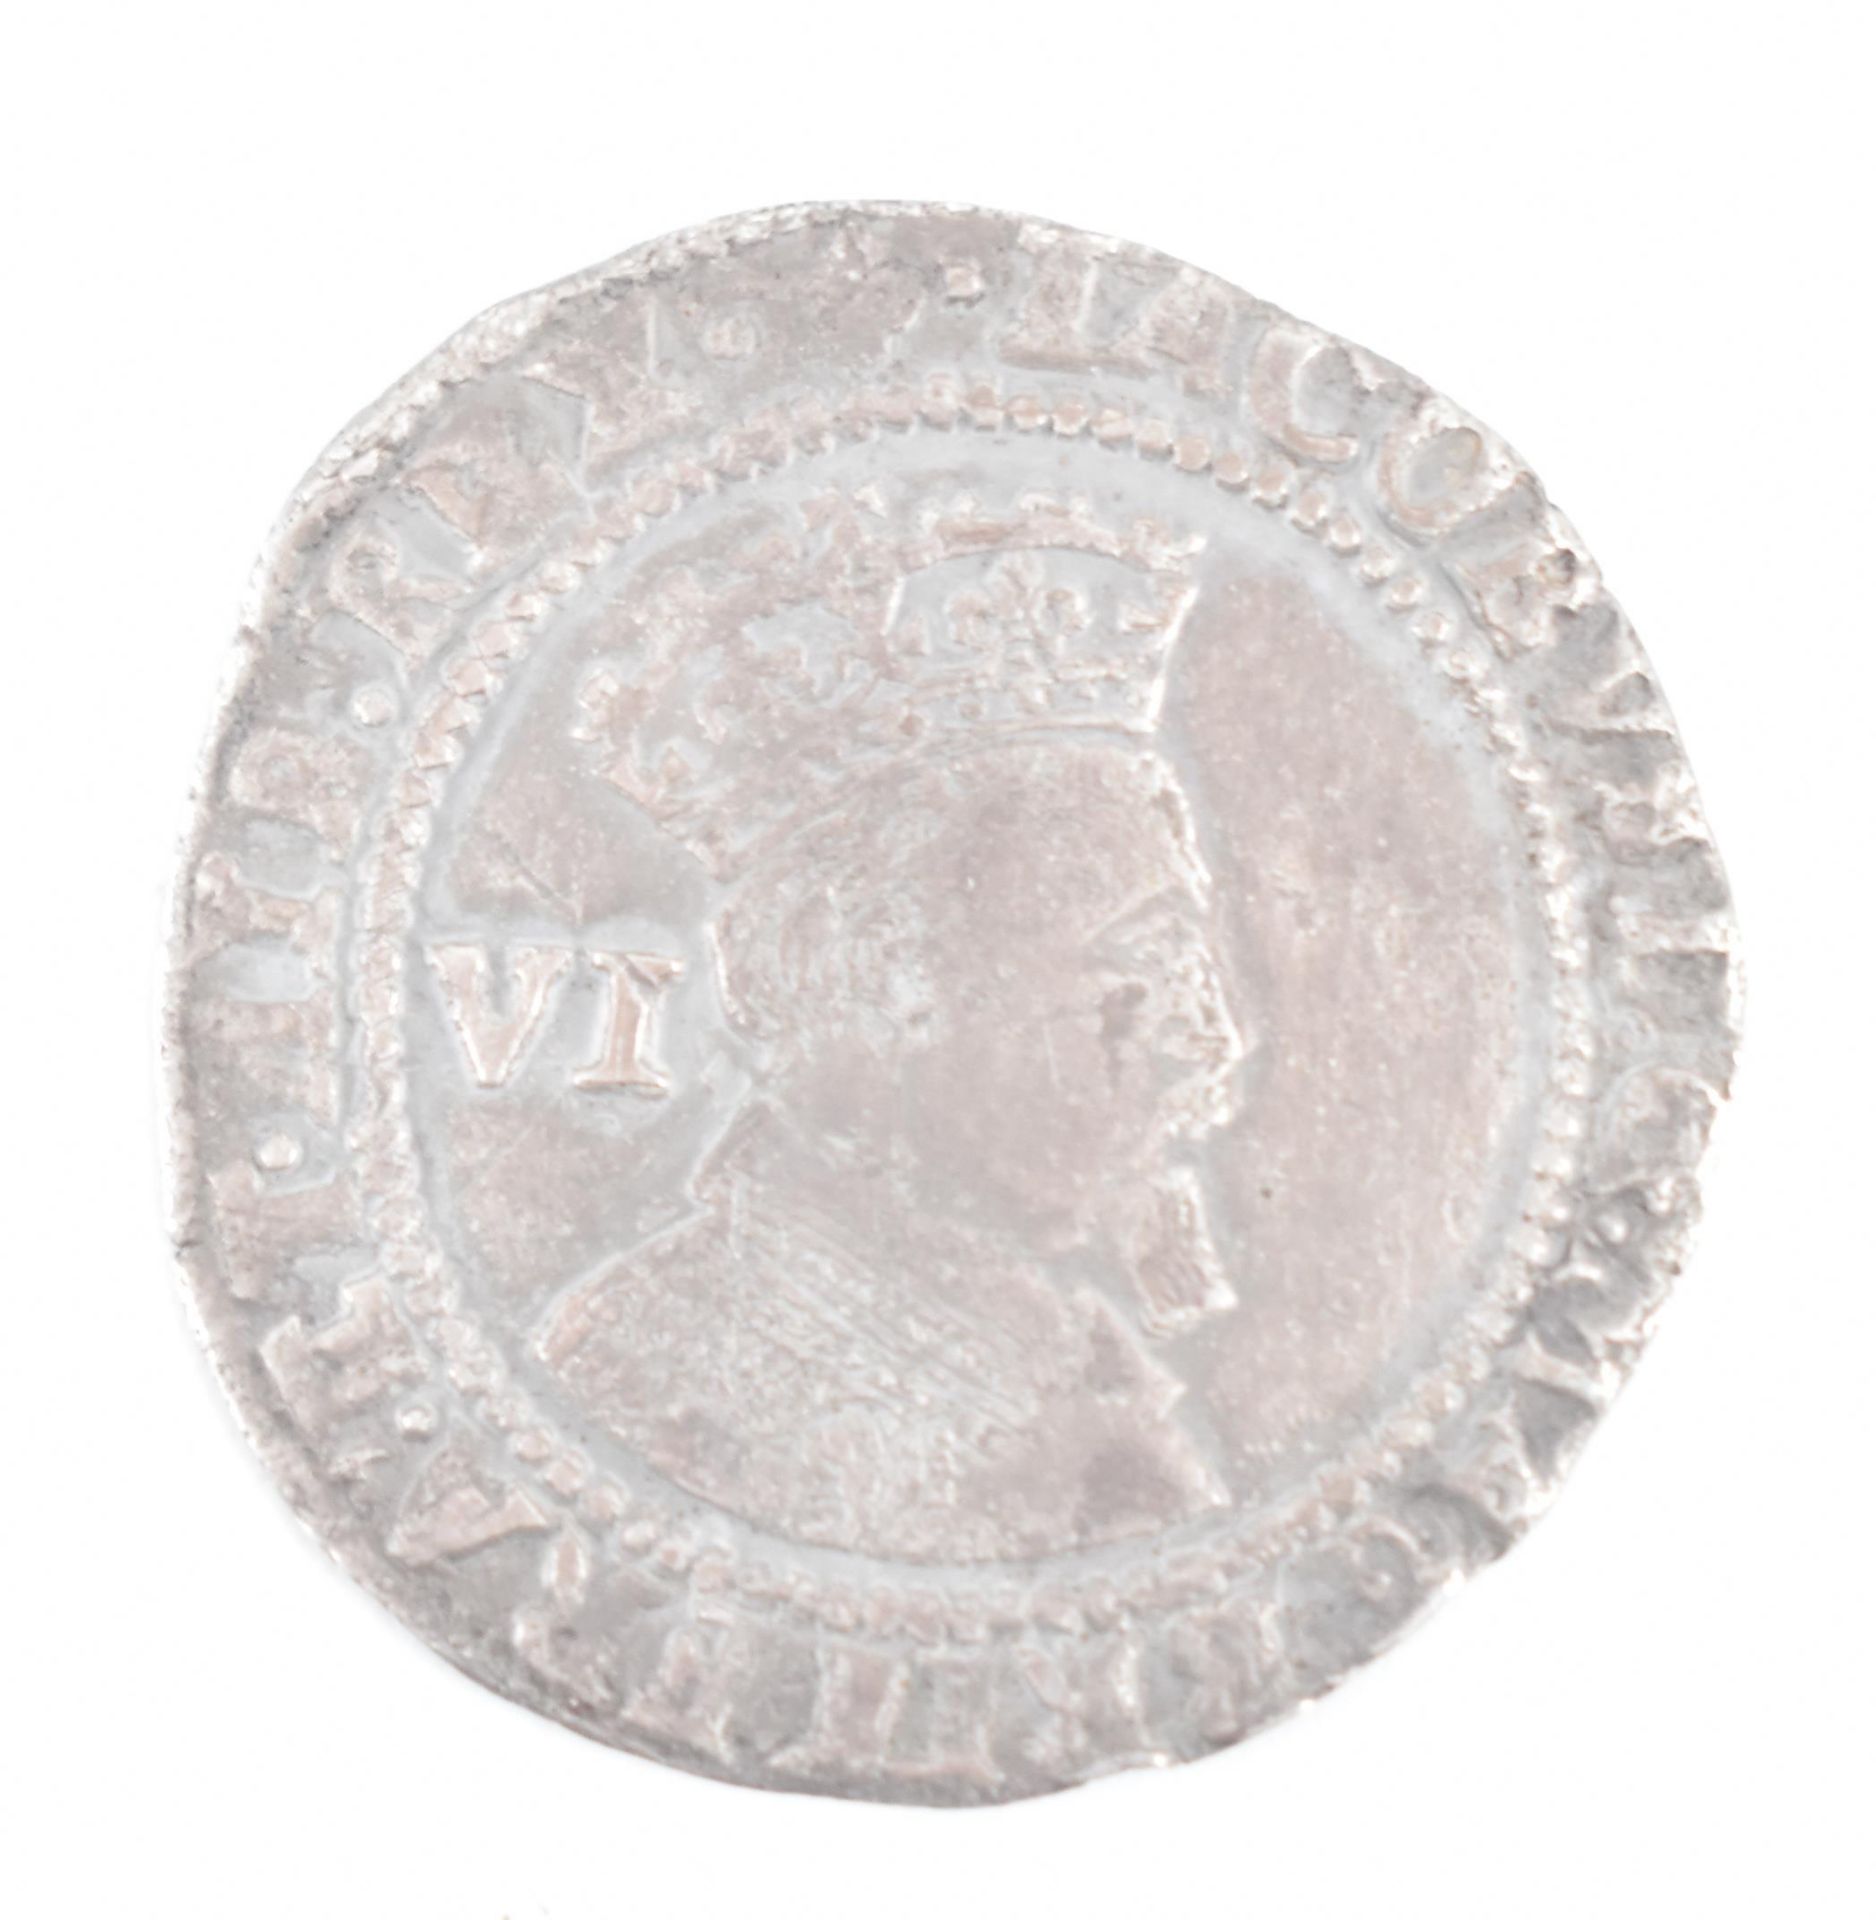 17TH CENTURY JAMES I HAMMERED SILVER SIXPENCE COIN